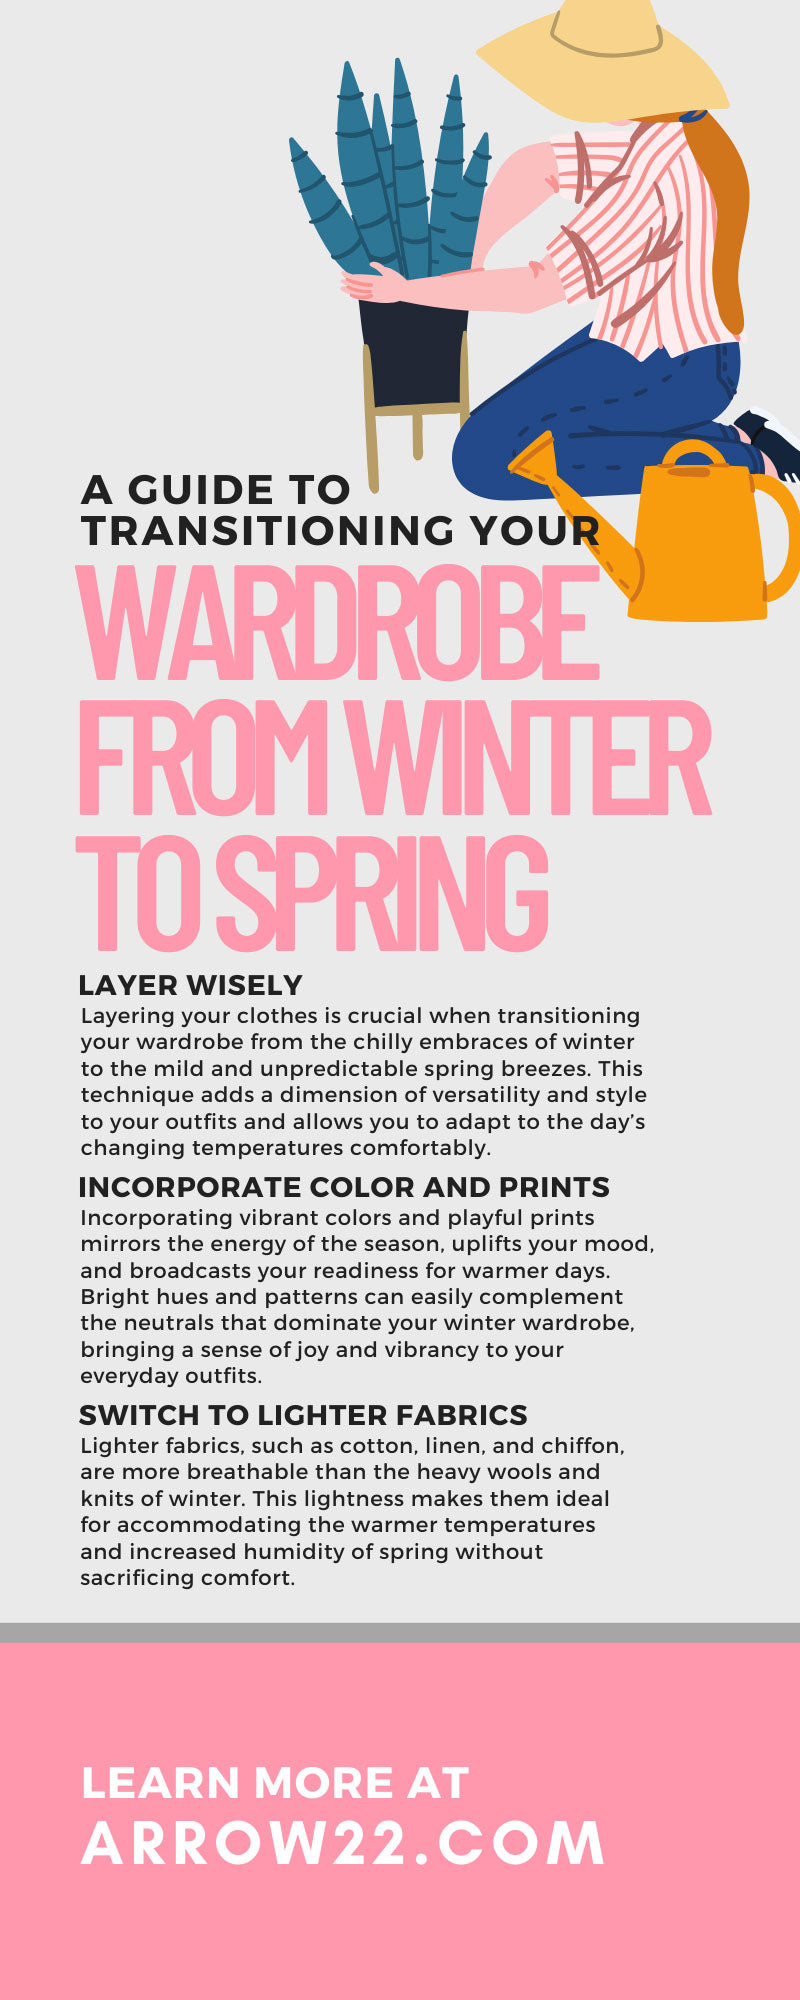 A Guide to Transitioning Your Wardrobe From Winter to Spring